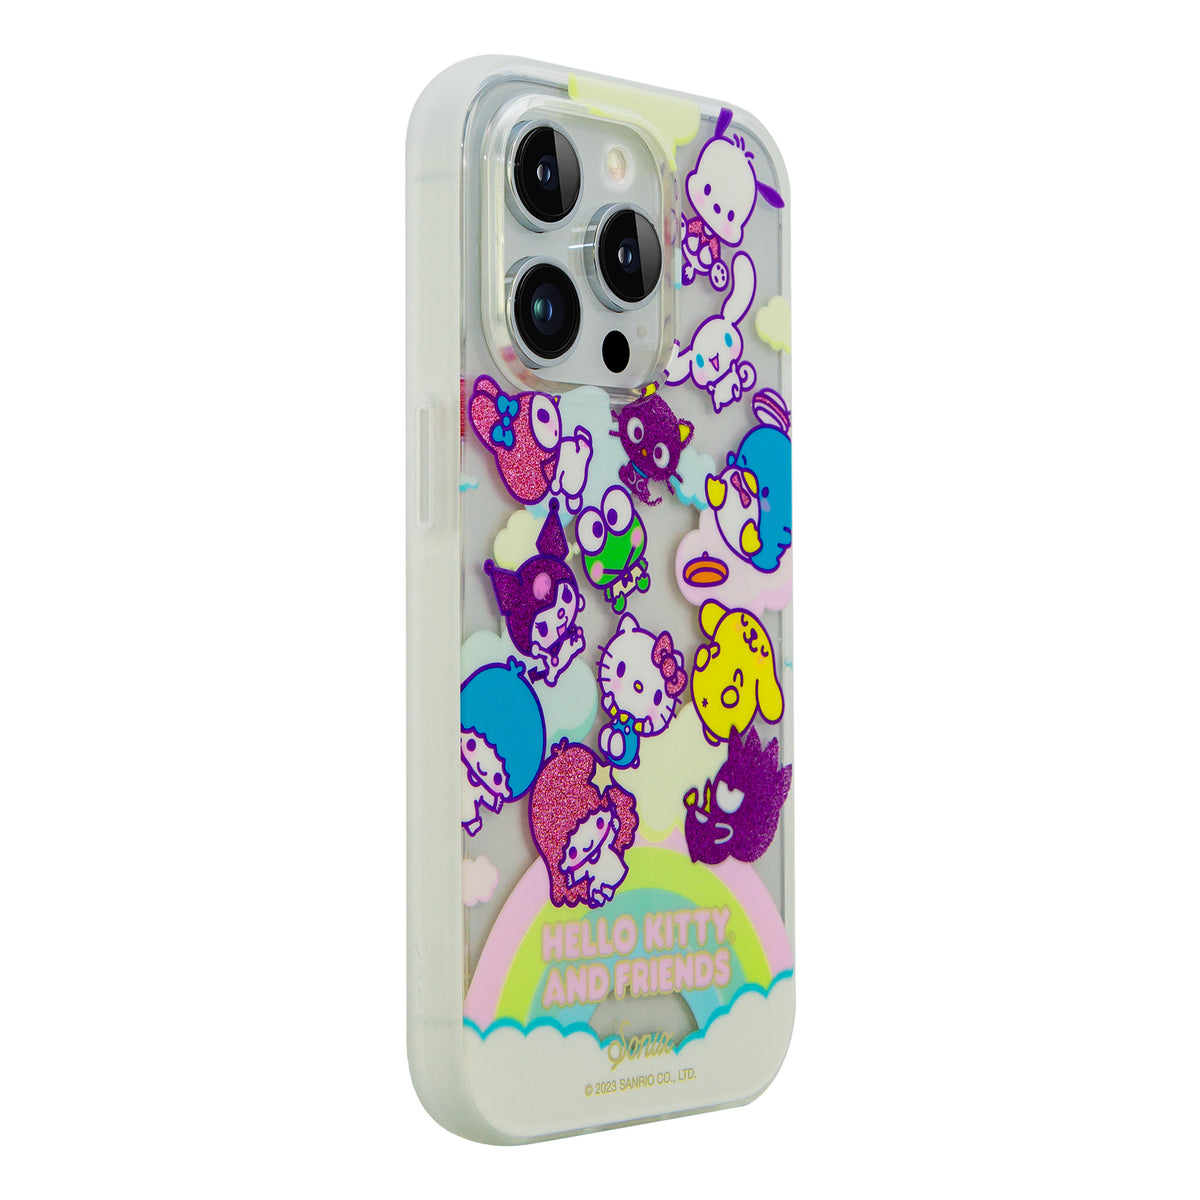 Hello Kitty and Friends x Sonix Surprises iPhone Case